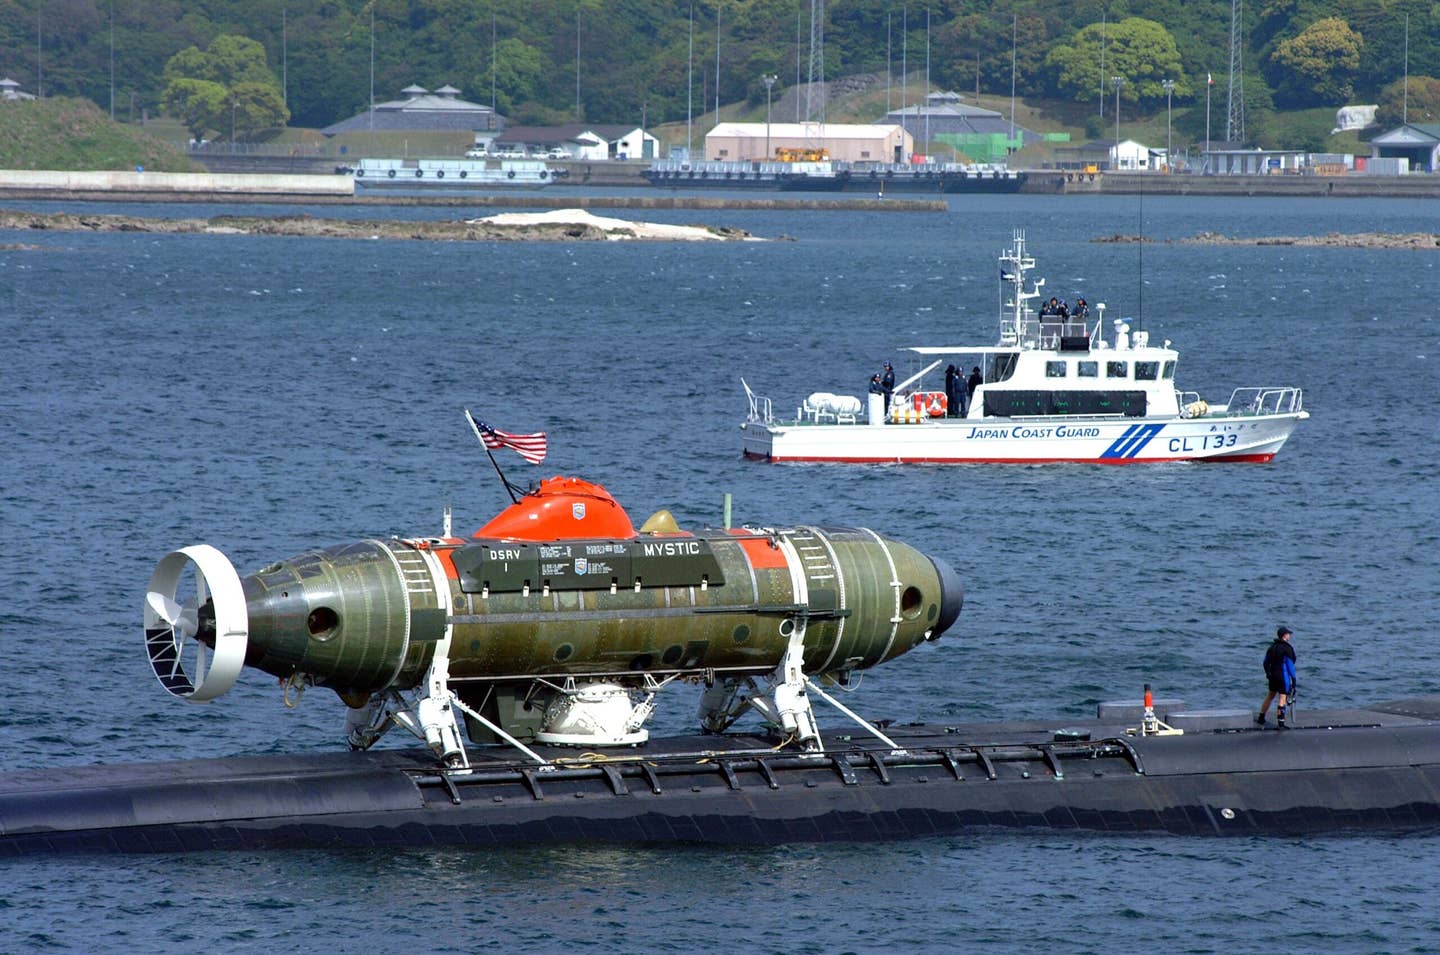 U.S. Navy <em>Los Angeles</em> class attack submarine USS <em>La Jolla</em> (SSN 701) with the deep submergence rescue vehicle <em>Mystic</em> (DSRV-1) attached, is escorted by the Japanese Coast Guard as it pulls out of Sasebo harbor to participate in the submarine rescue Exercise Pacific Reach, April 25, 2002. <em>U.S. Navy photo by Journalist 3rd Class Wes Eplen</em>